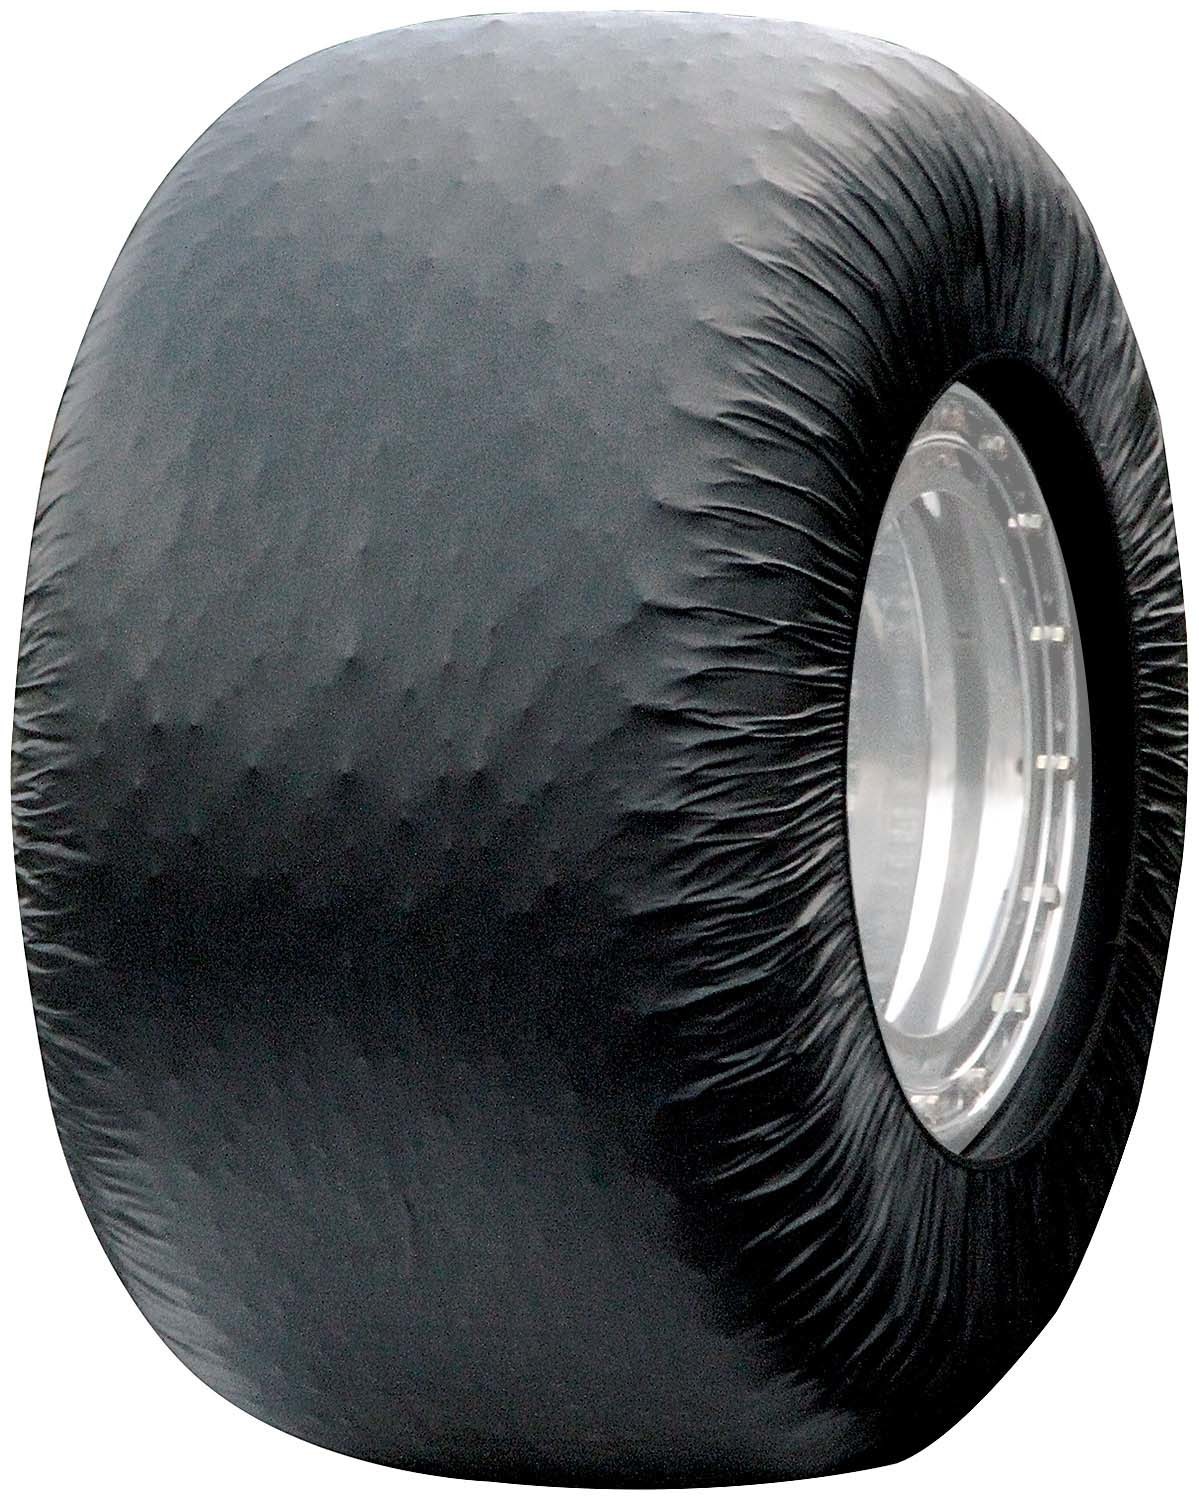 Easy Wrap Tire Covers 12pk LM92